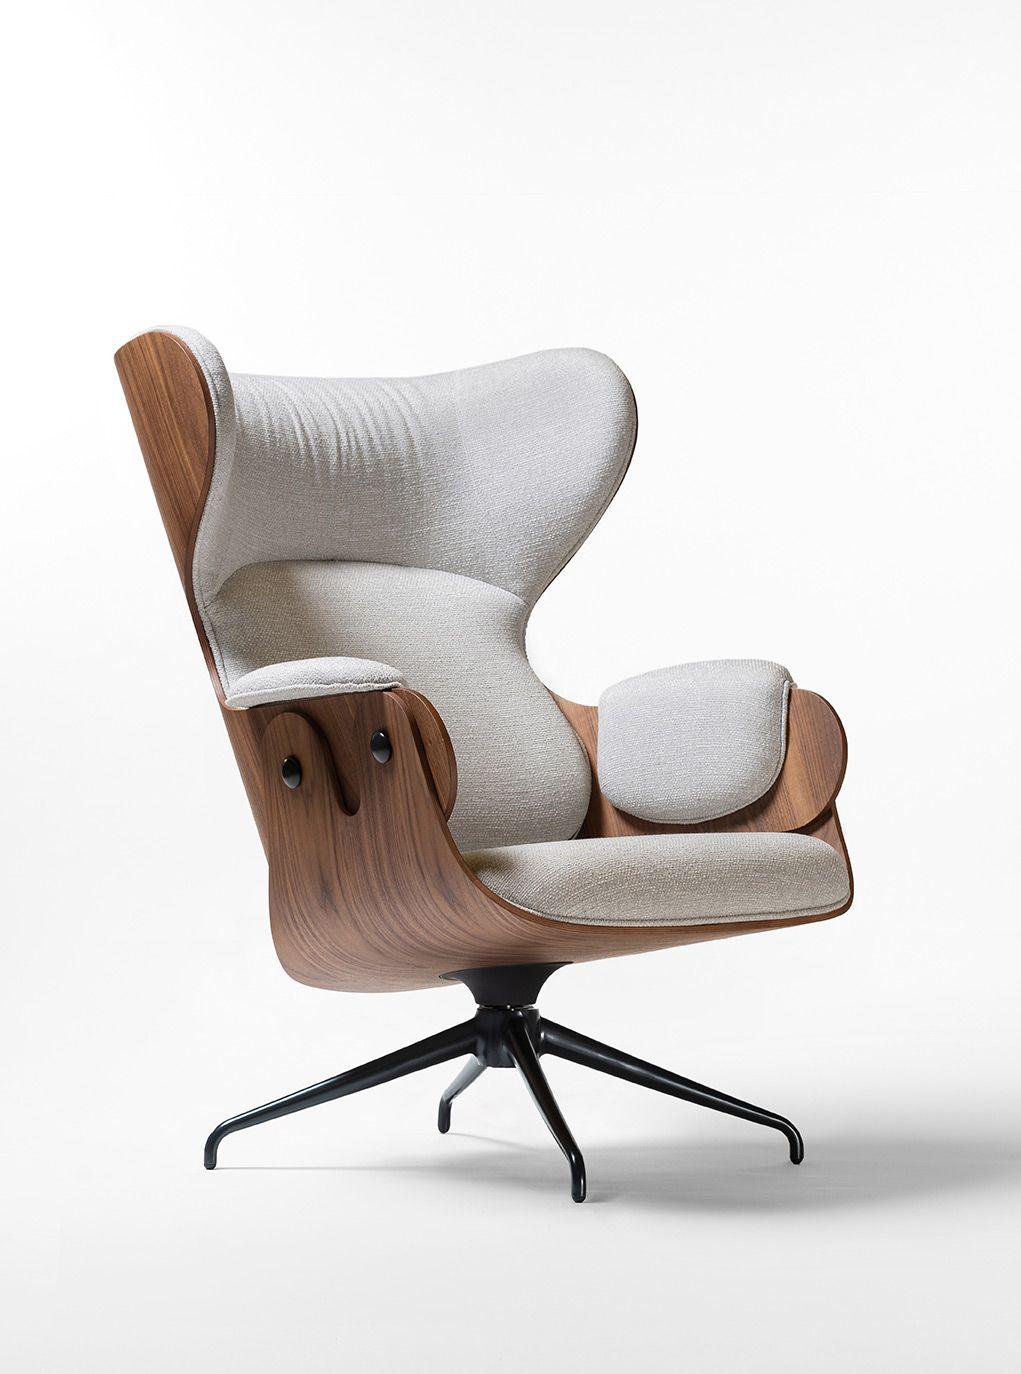 Lacquered Lounger Brown Armchair by Jaime Hayon